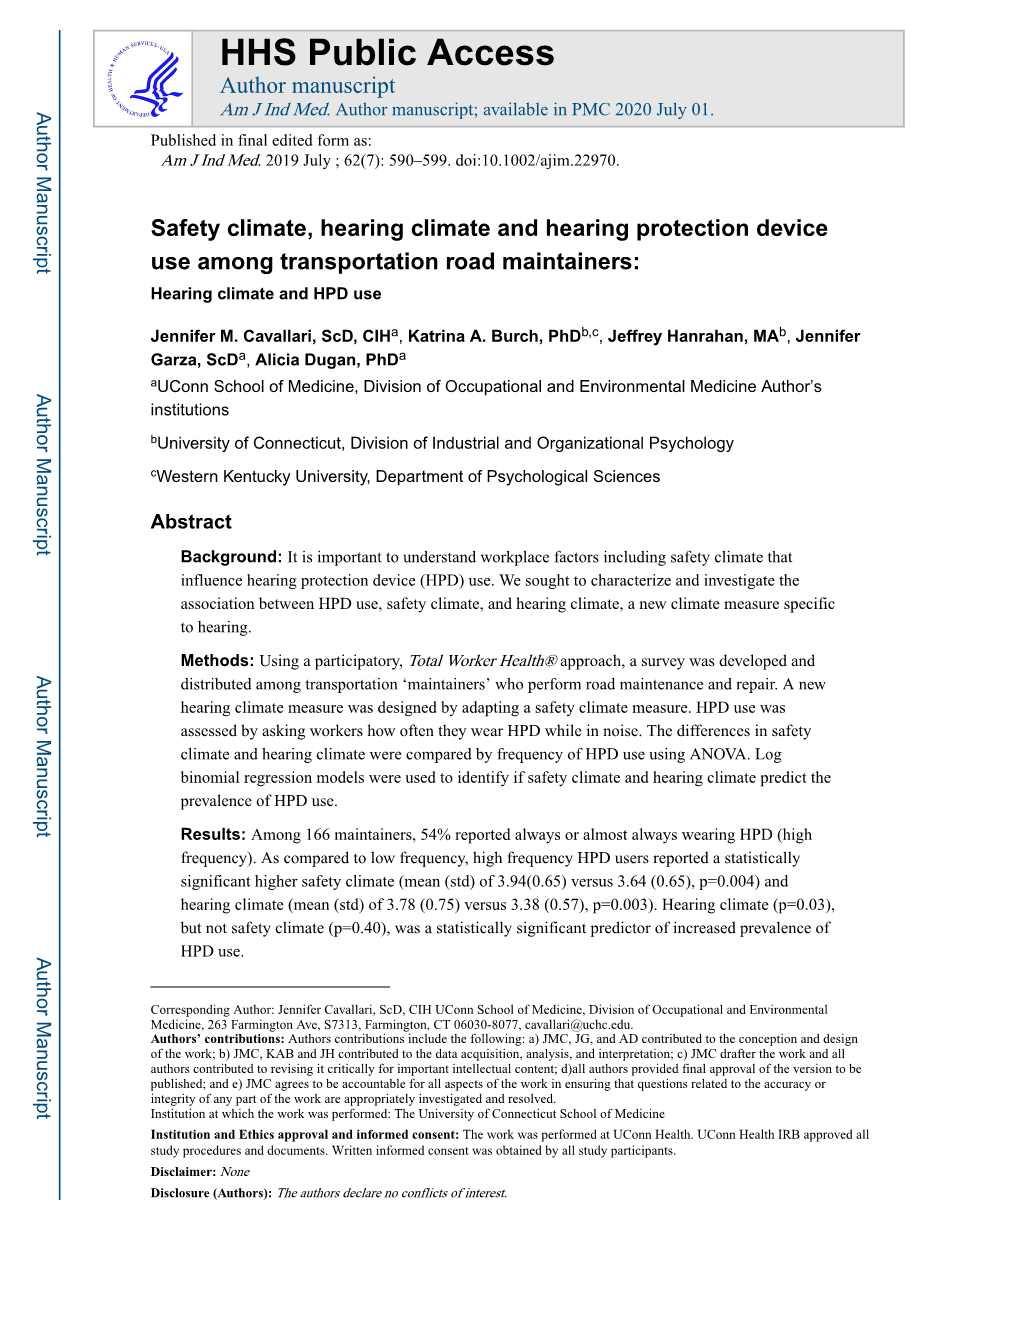 Safety Climate, Hearing Climate and Hearing Protection Device Use Among Transportation Road Maintainers: Hearing Climate and HPD Use